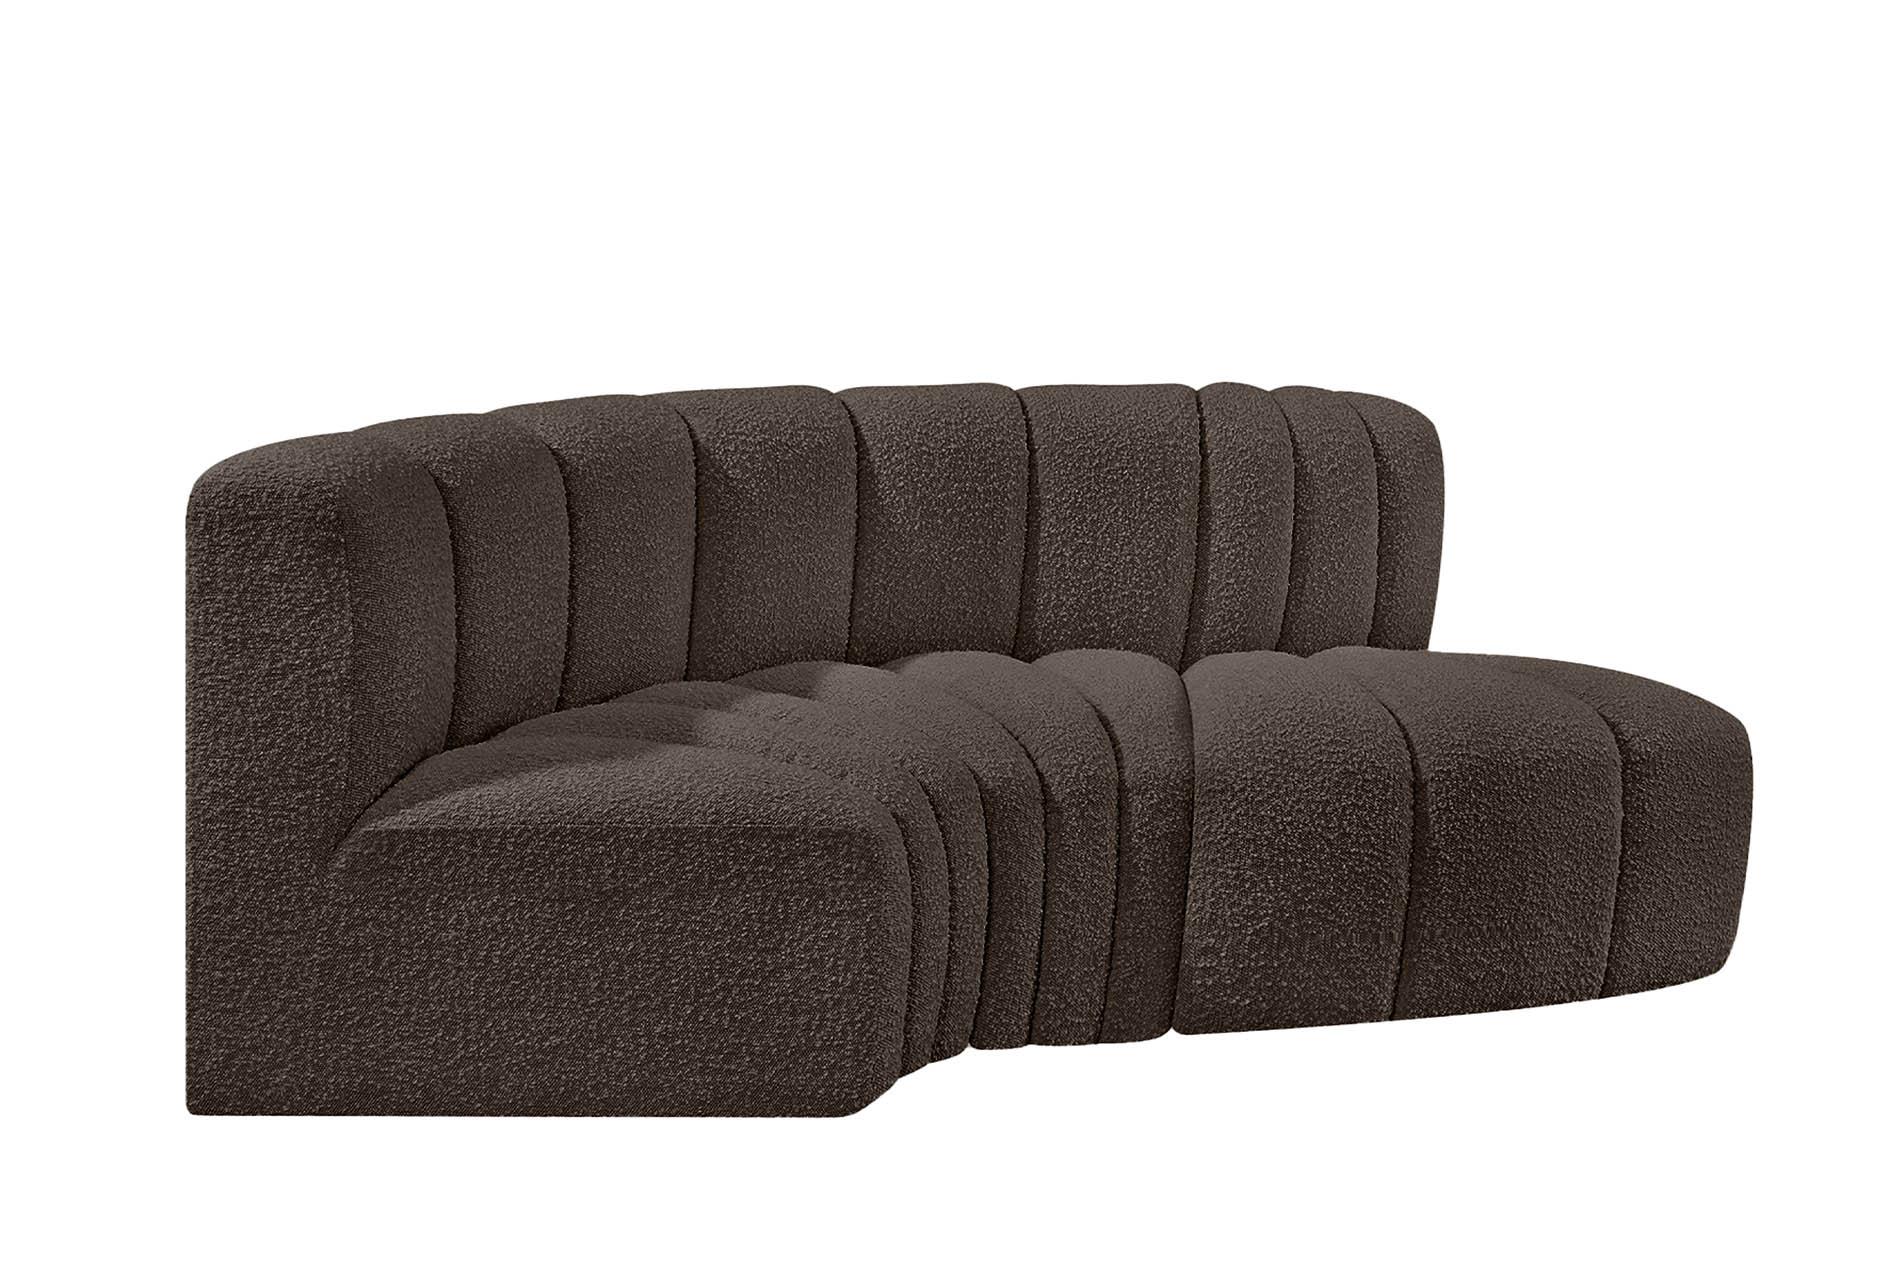 Contemporary, Modern Modular Sectional Sofa ARC 102Brown-S3D 102Brown-S3D in Brown 